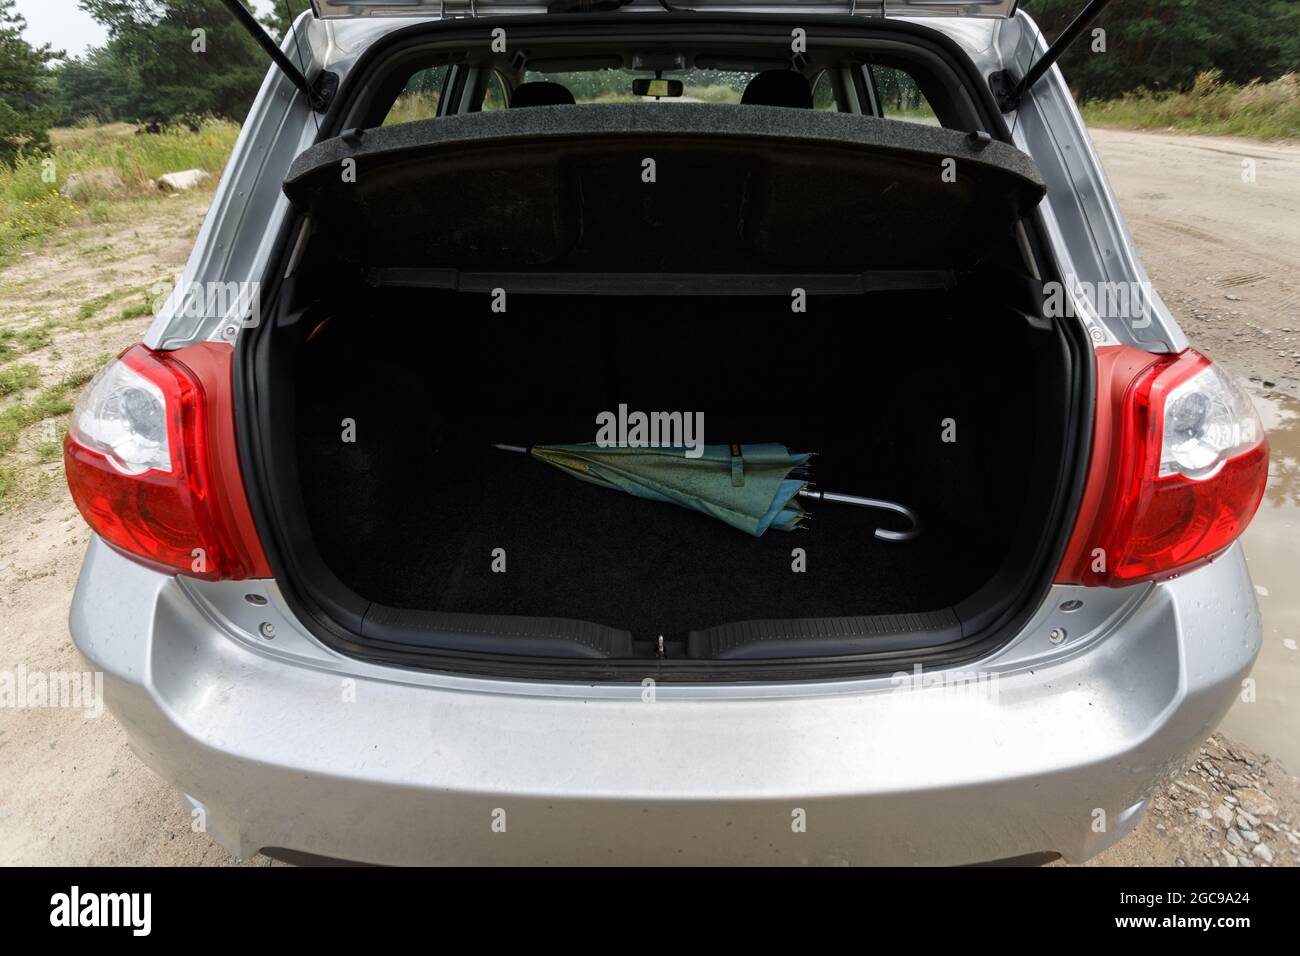 Silver color car with an open trunk Stock Photo